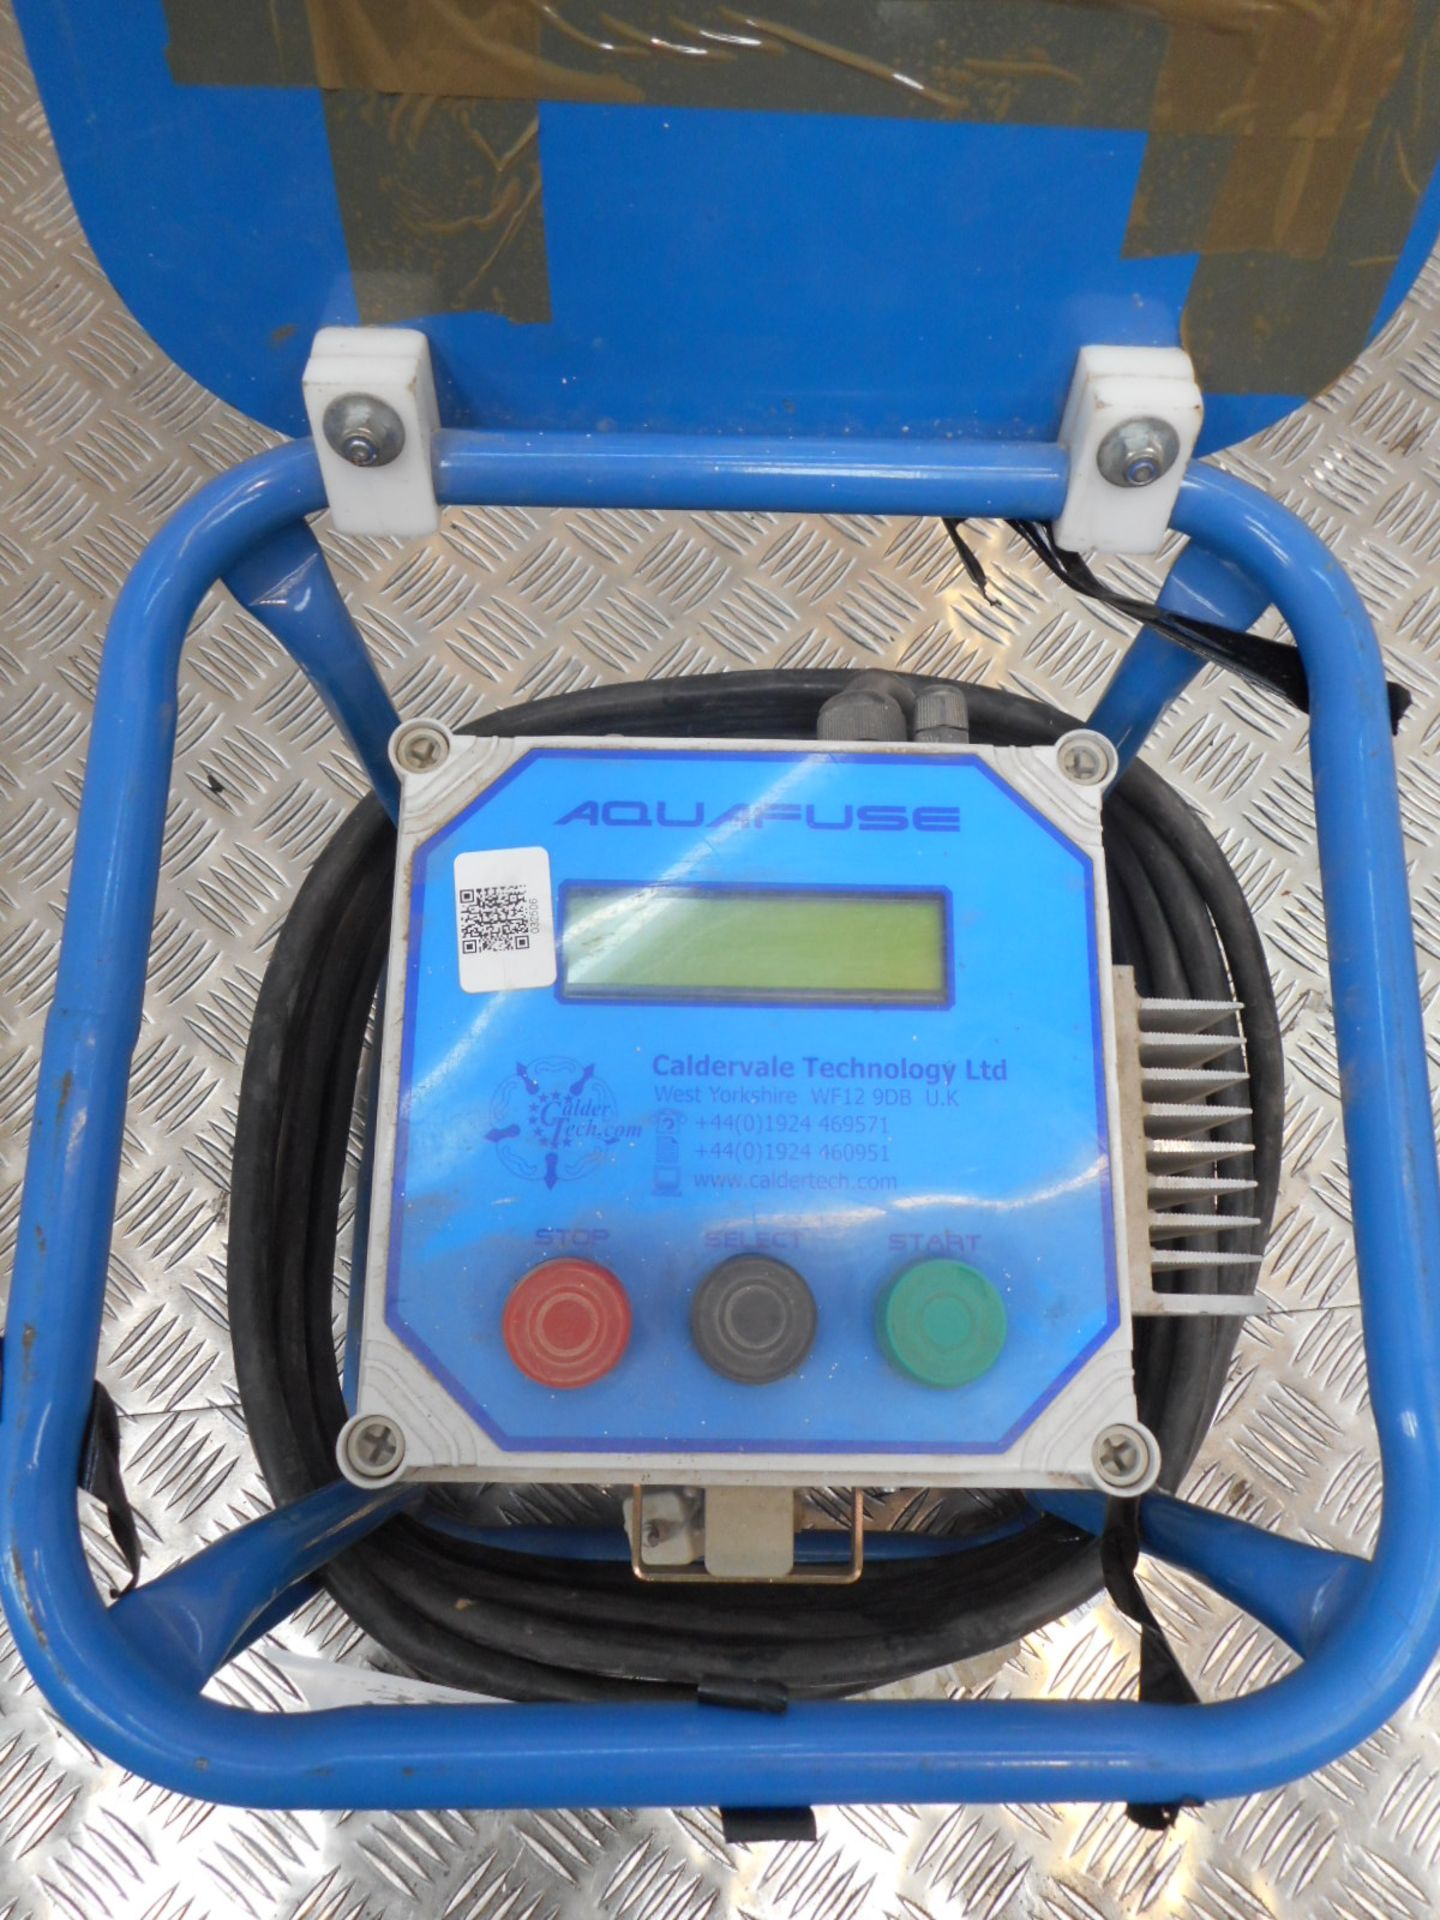 AQUAFUSE AF 315 {032506} NON PRESSURE DRAINAGE FUSION WELDER Used for the accurate connection of Val - Image 2 of 2